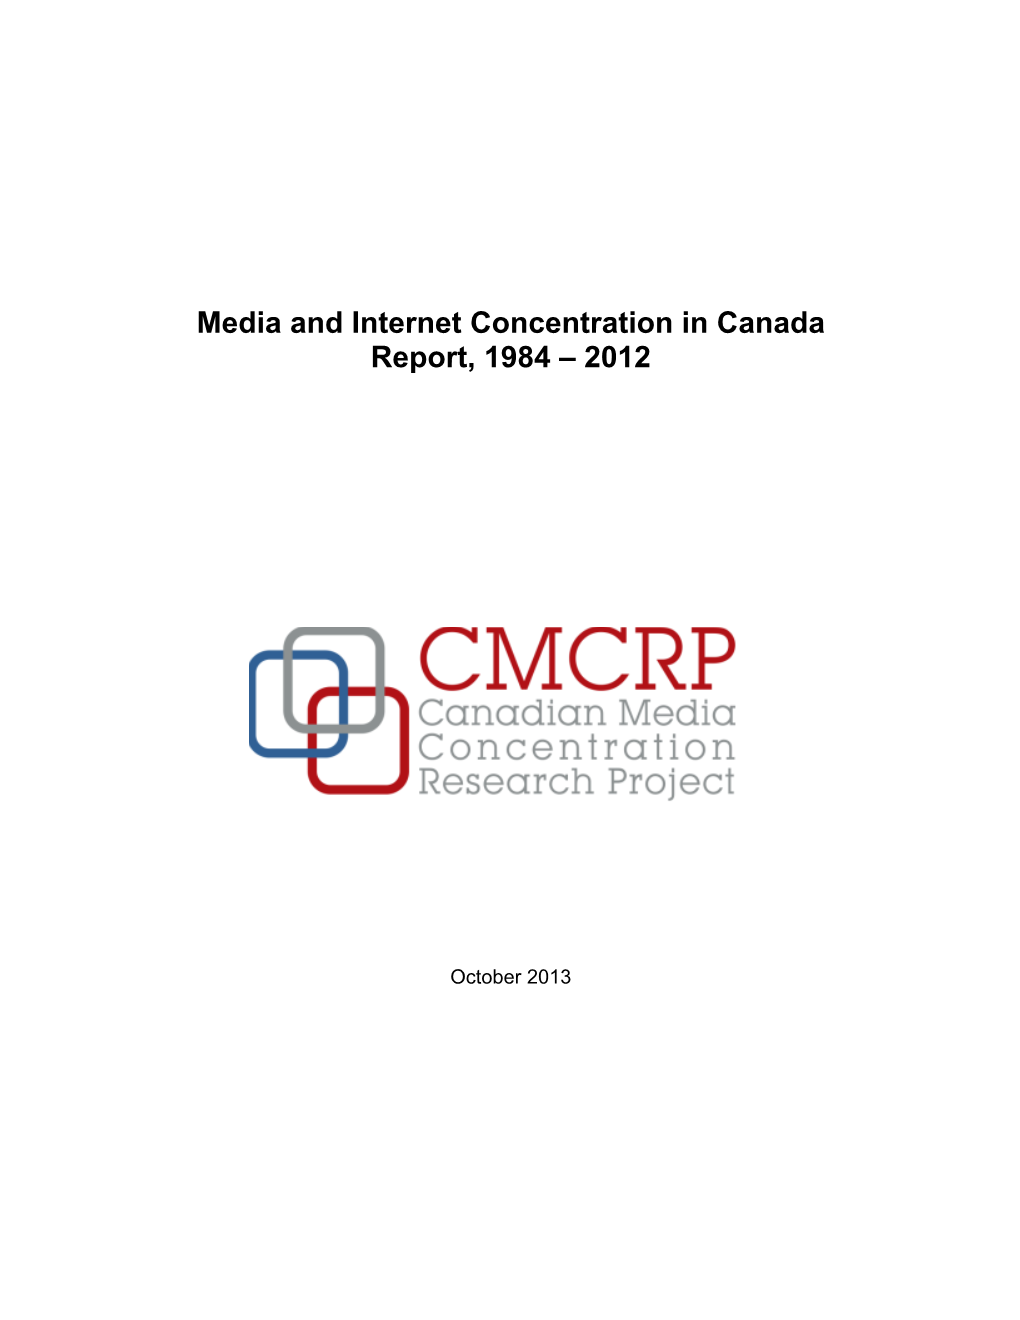 Media and Internet Concentration in Canada Report, 1984 – 2012